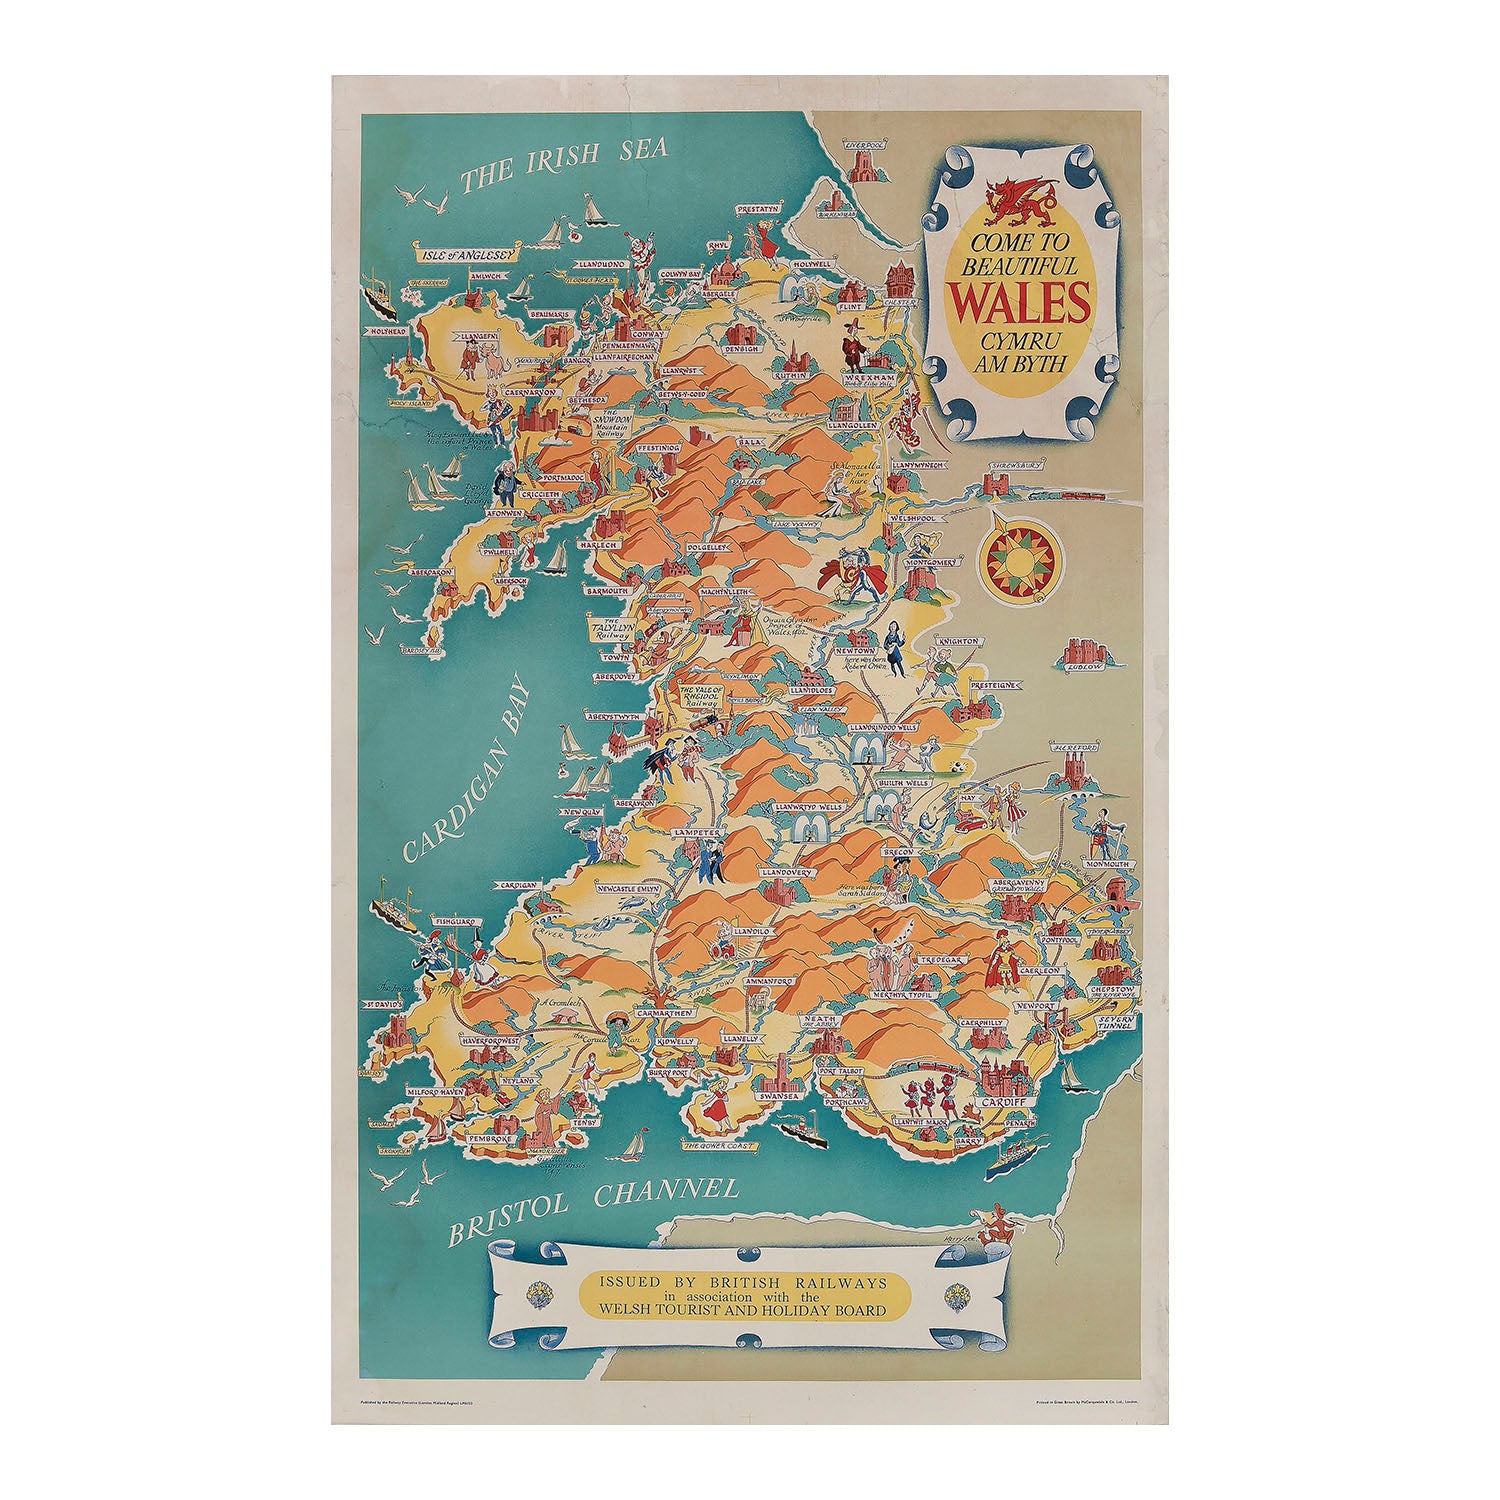 pictorial poster map of Wales by Kerry Lee, issued by British Railways and the Welsh Tourist and Holiday Board, c.1950. Depictions of historical buildings, famous people, places to visit etc.